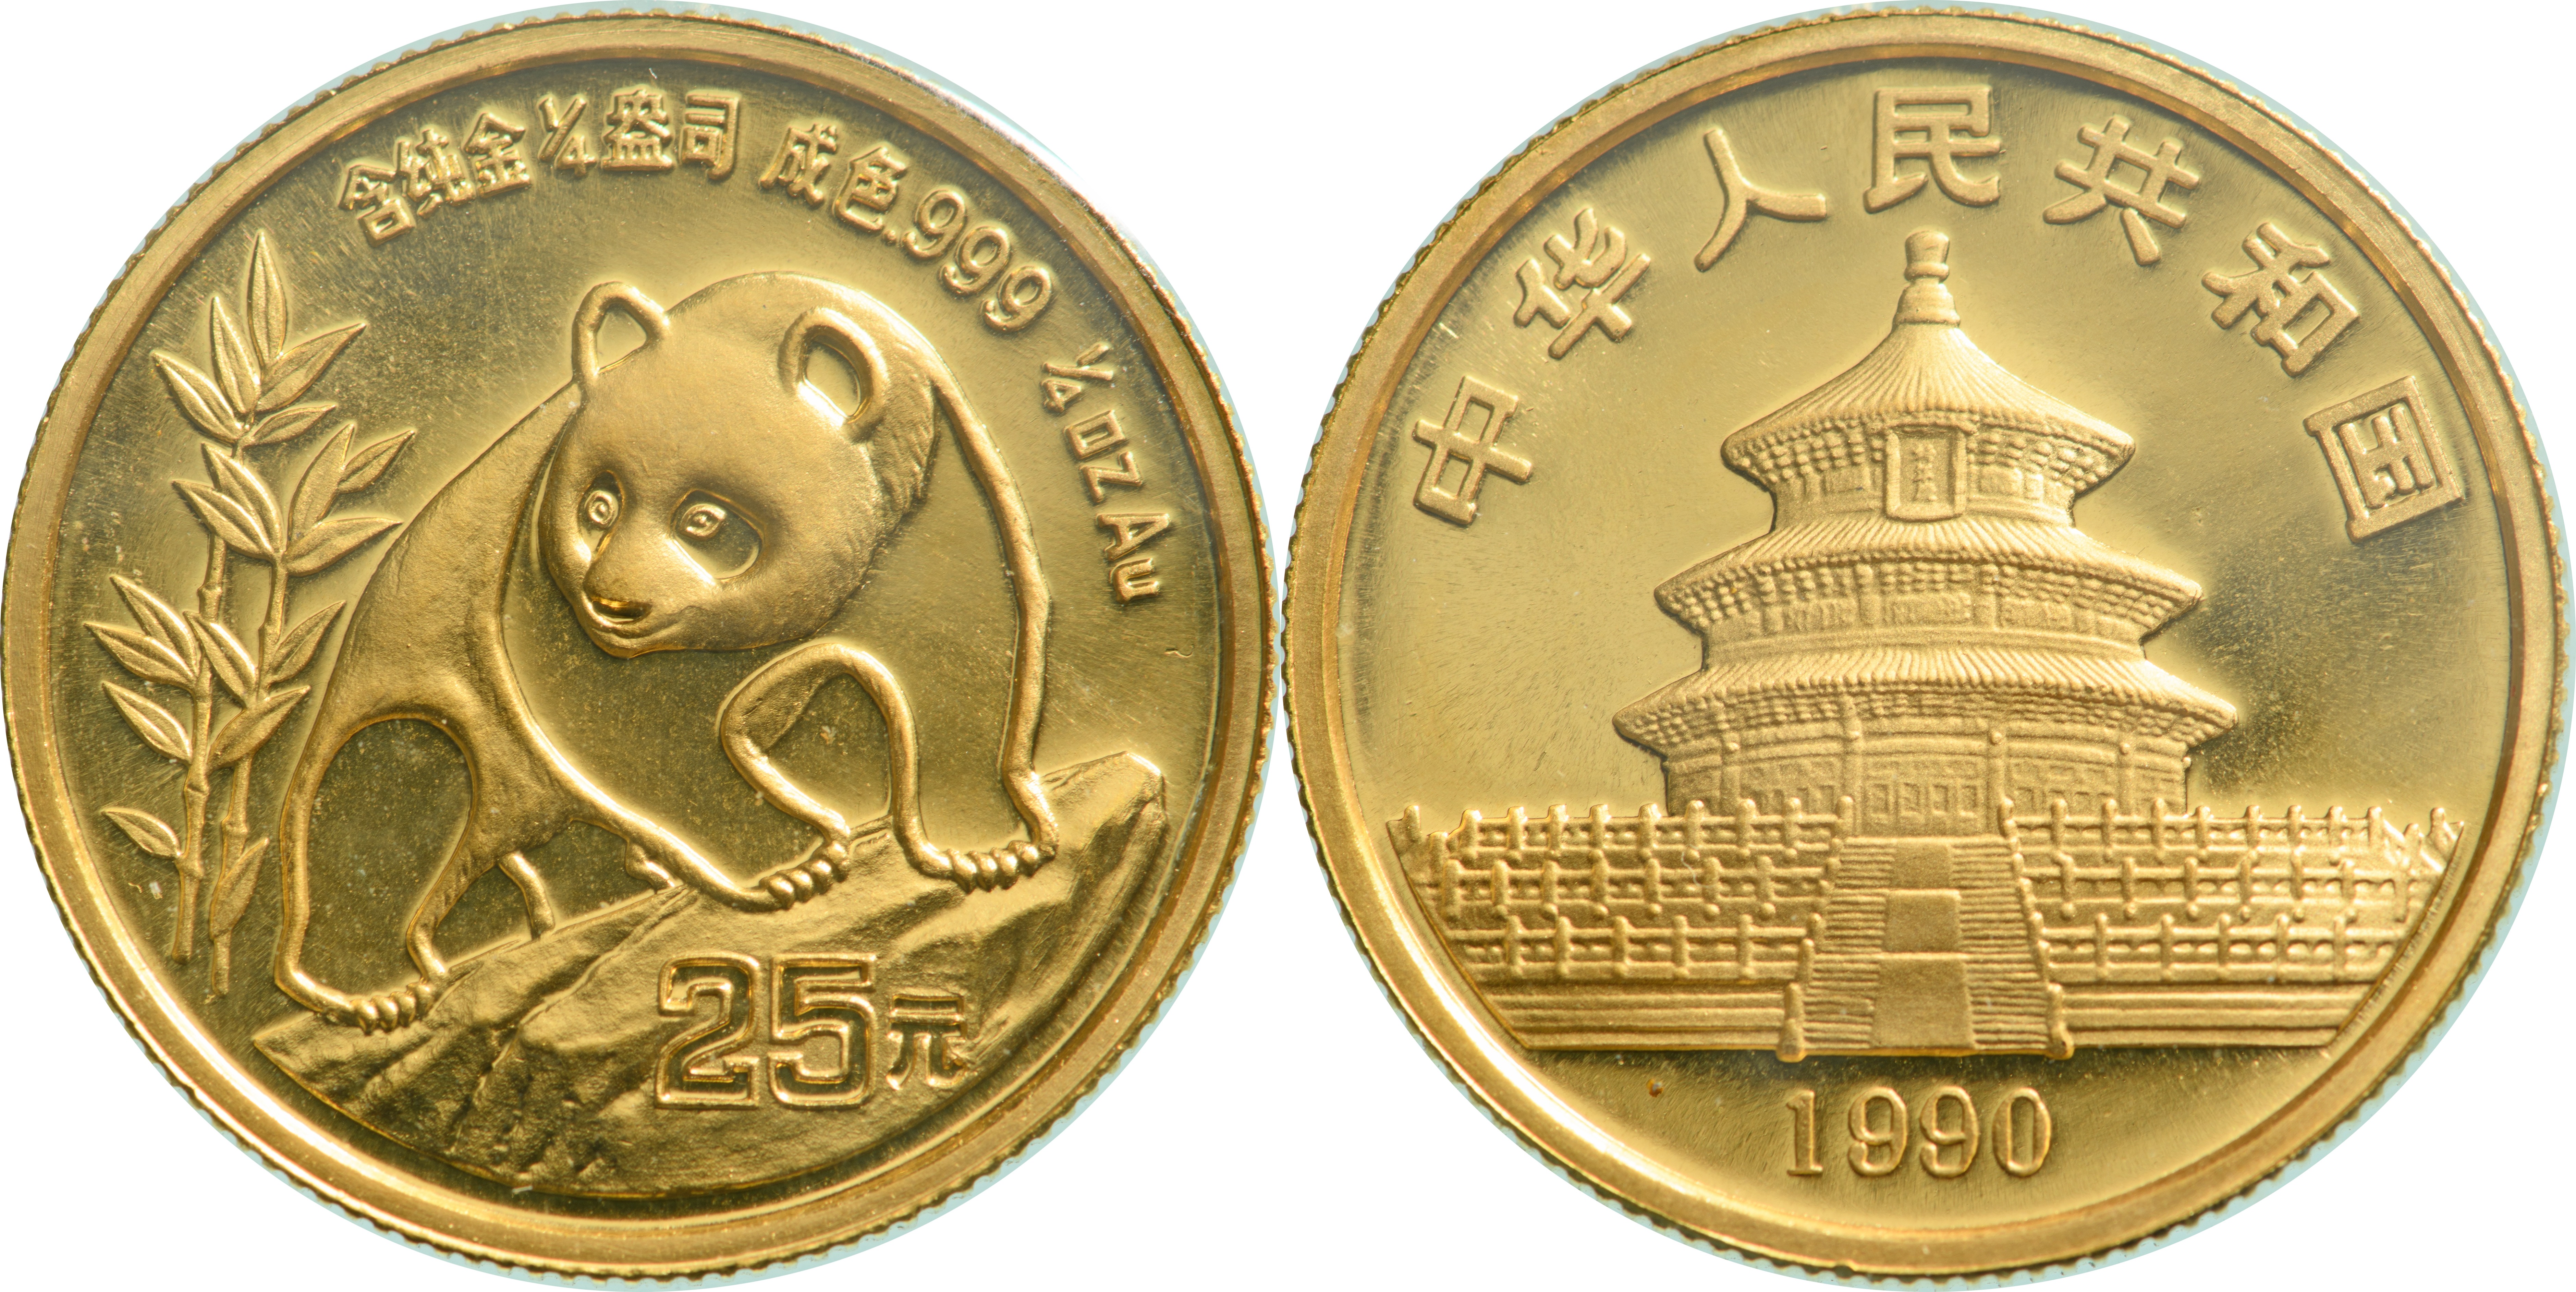 25 Yuan 1990, small date variety